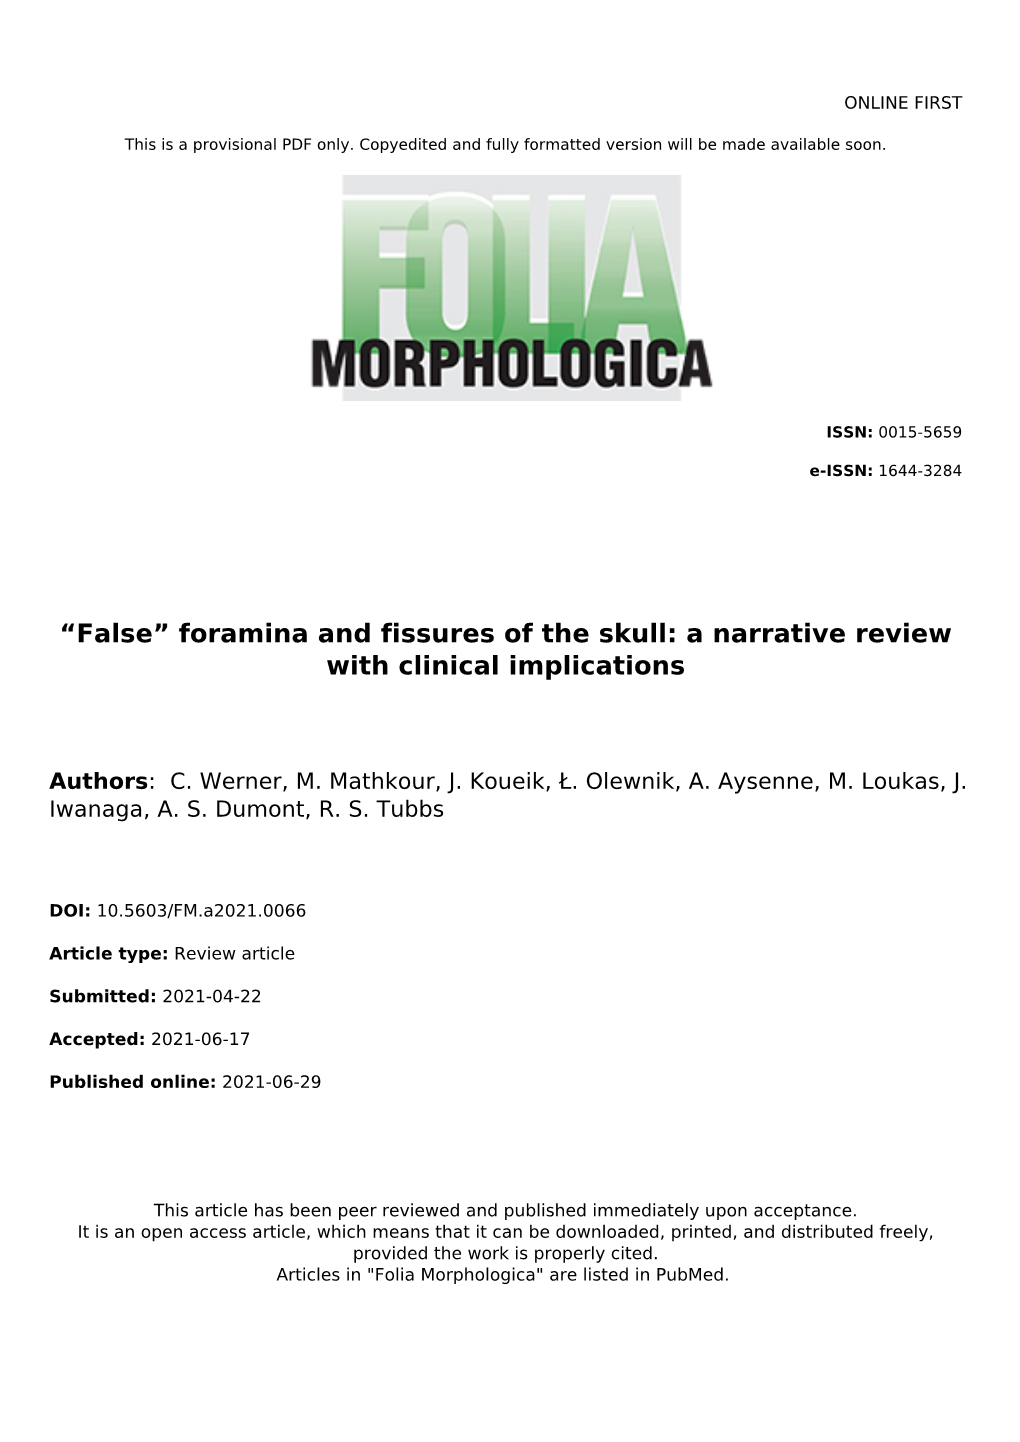 “False” Foramina and Fissures of the Skull: a Narrative Review with Clinical Implications